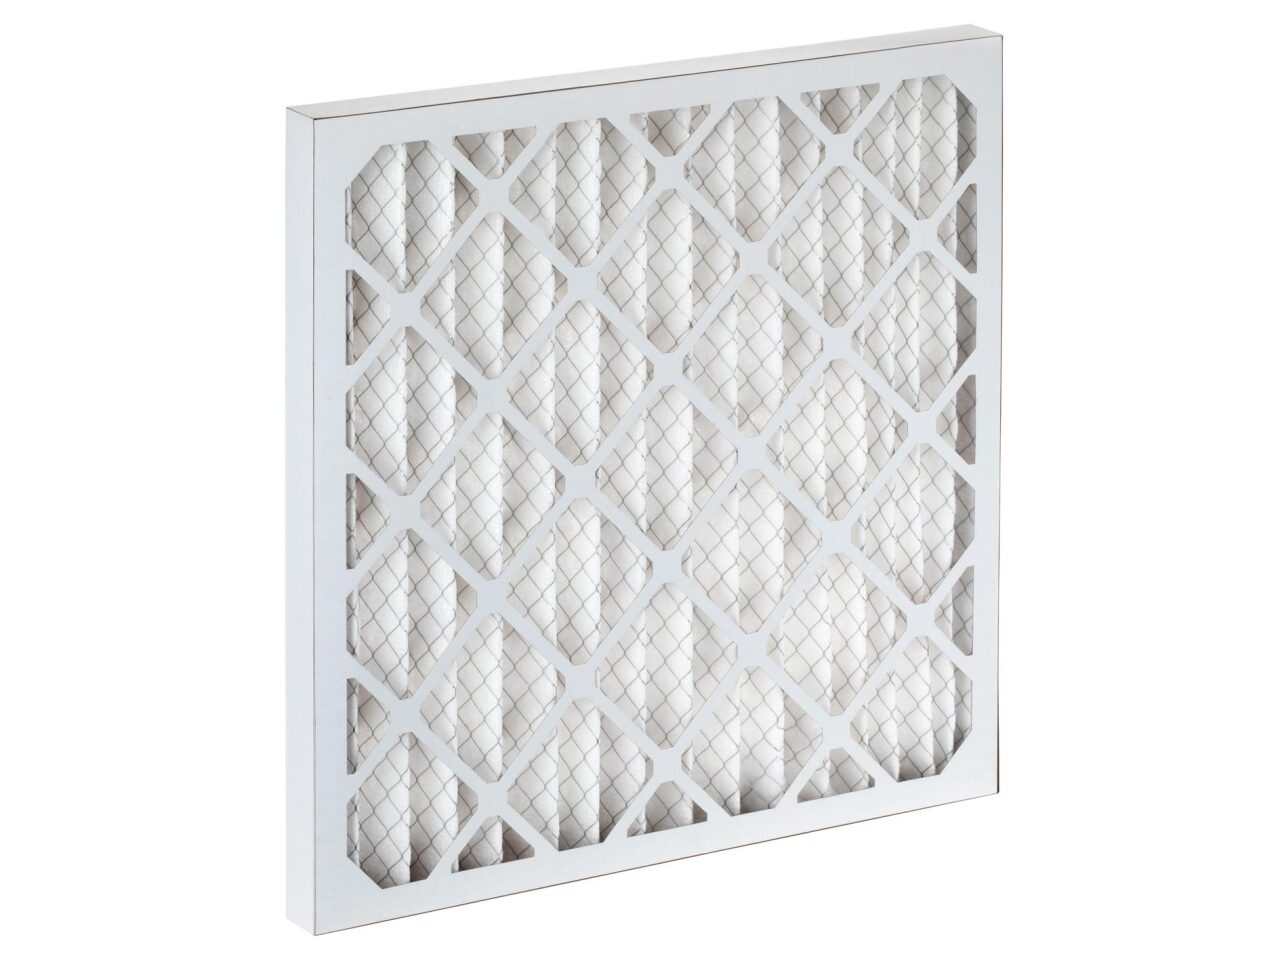  Airpanel Eco Synthetic pleated filter